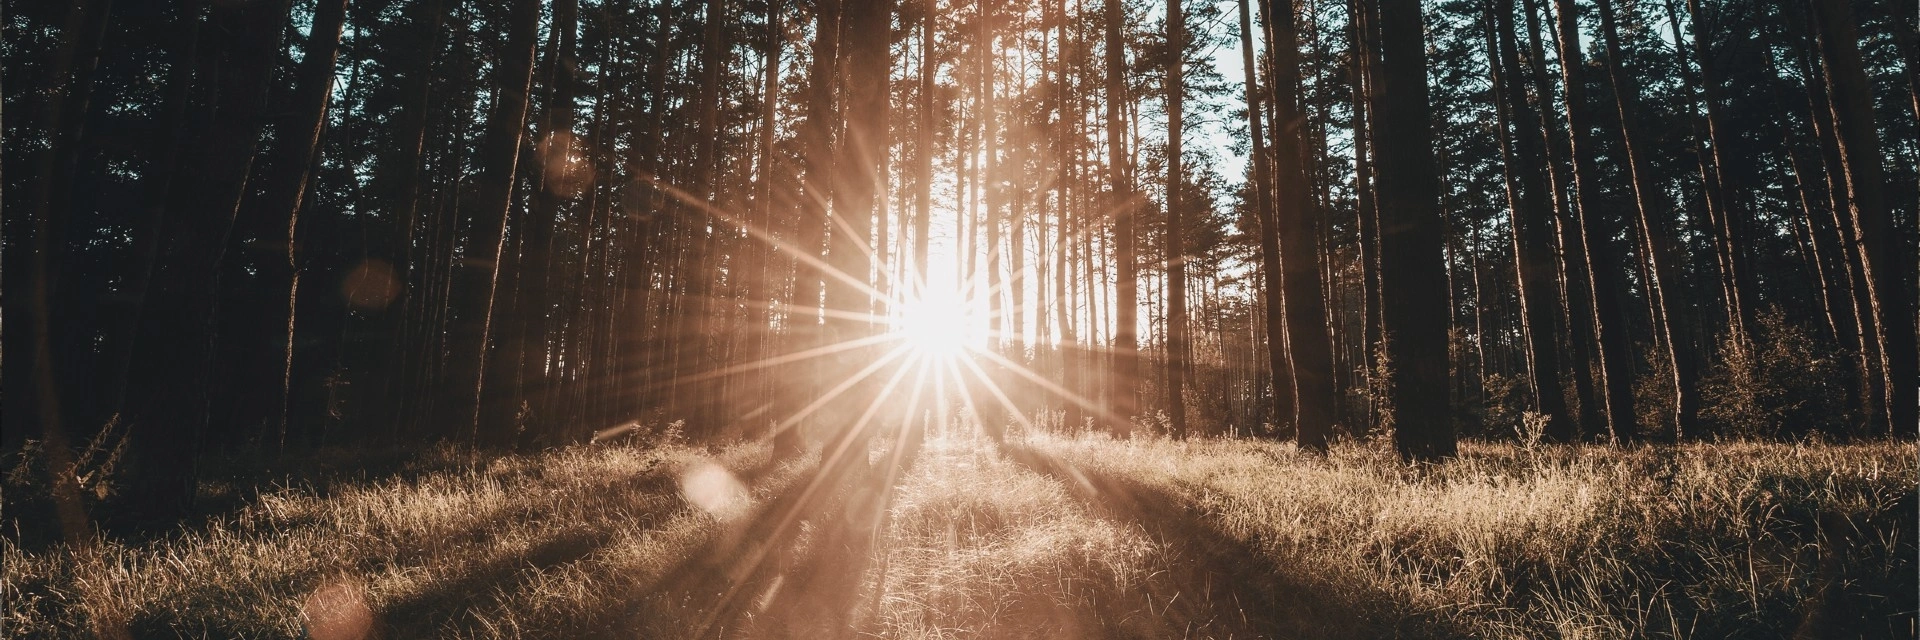 Image of a sunset through a forest